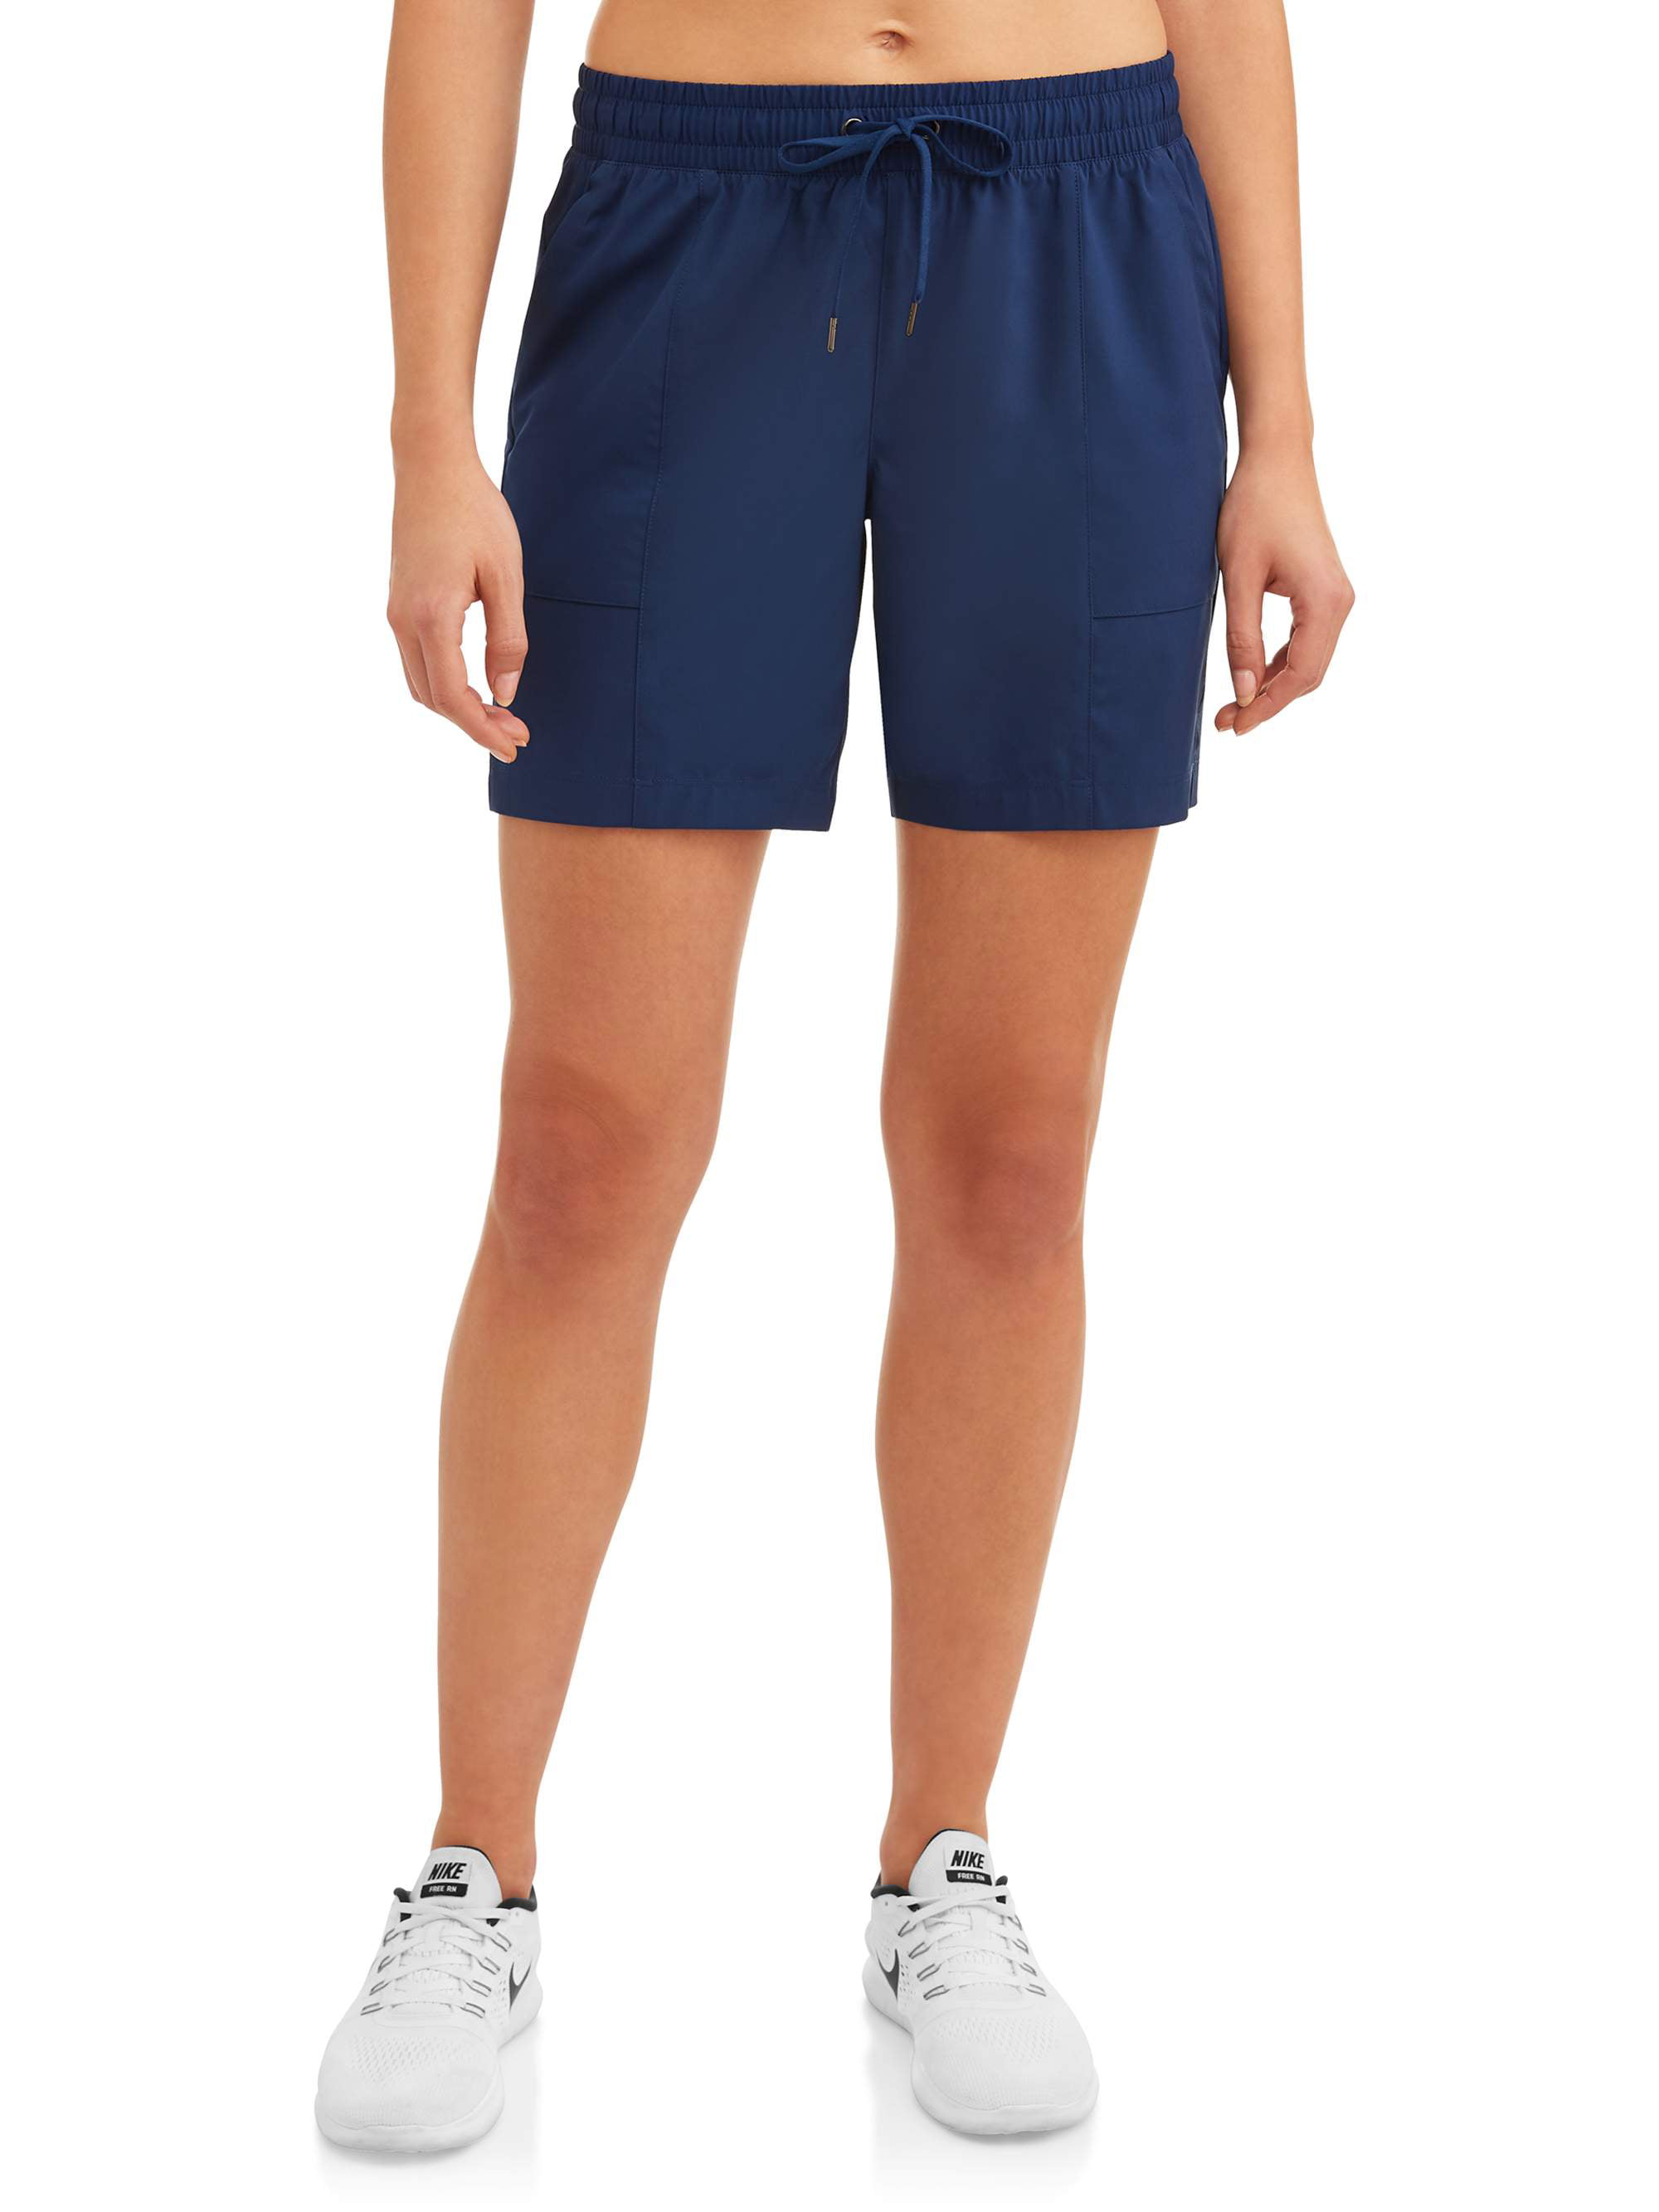 Athletic Brand Shorts Walmart  International Society of Precision  Agriculture